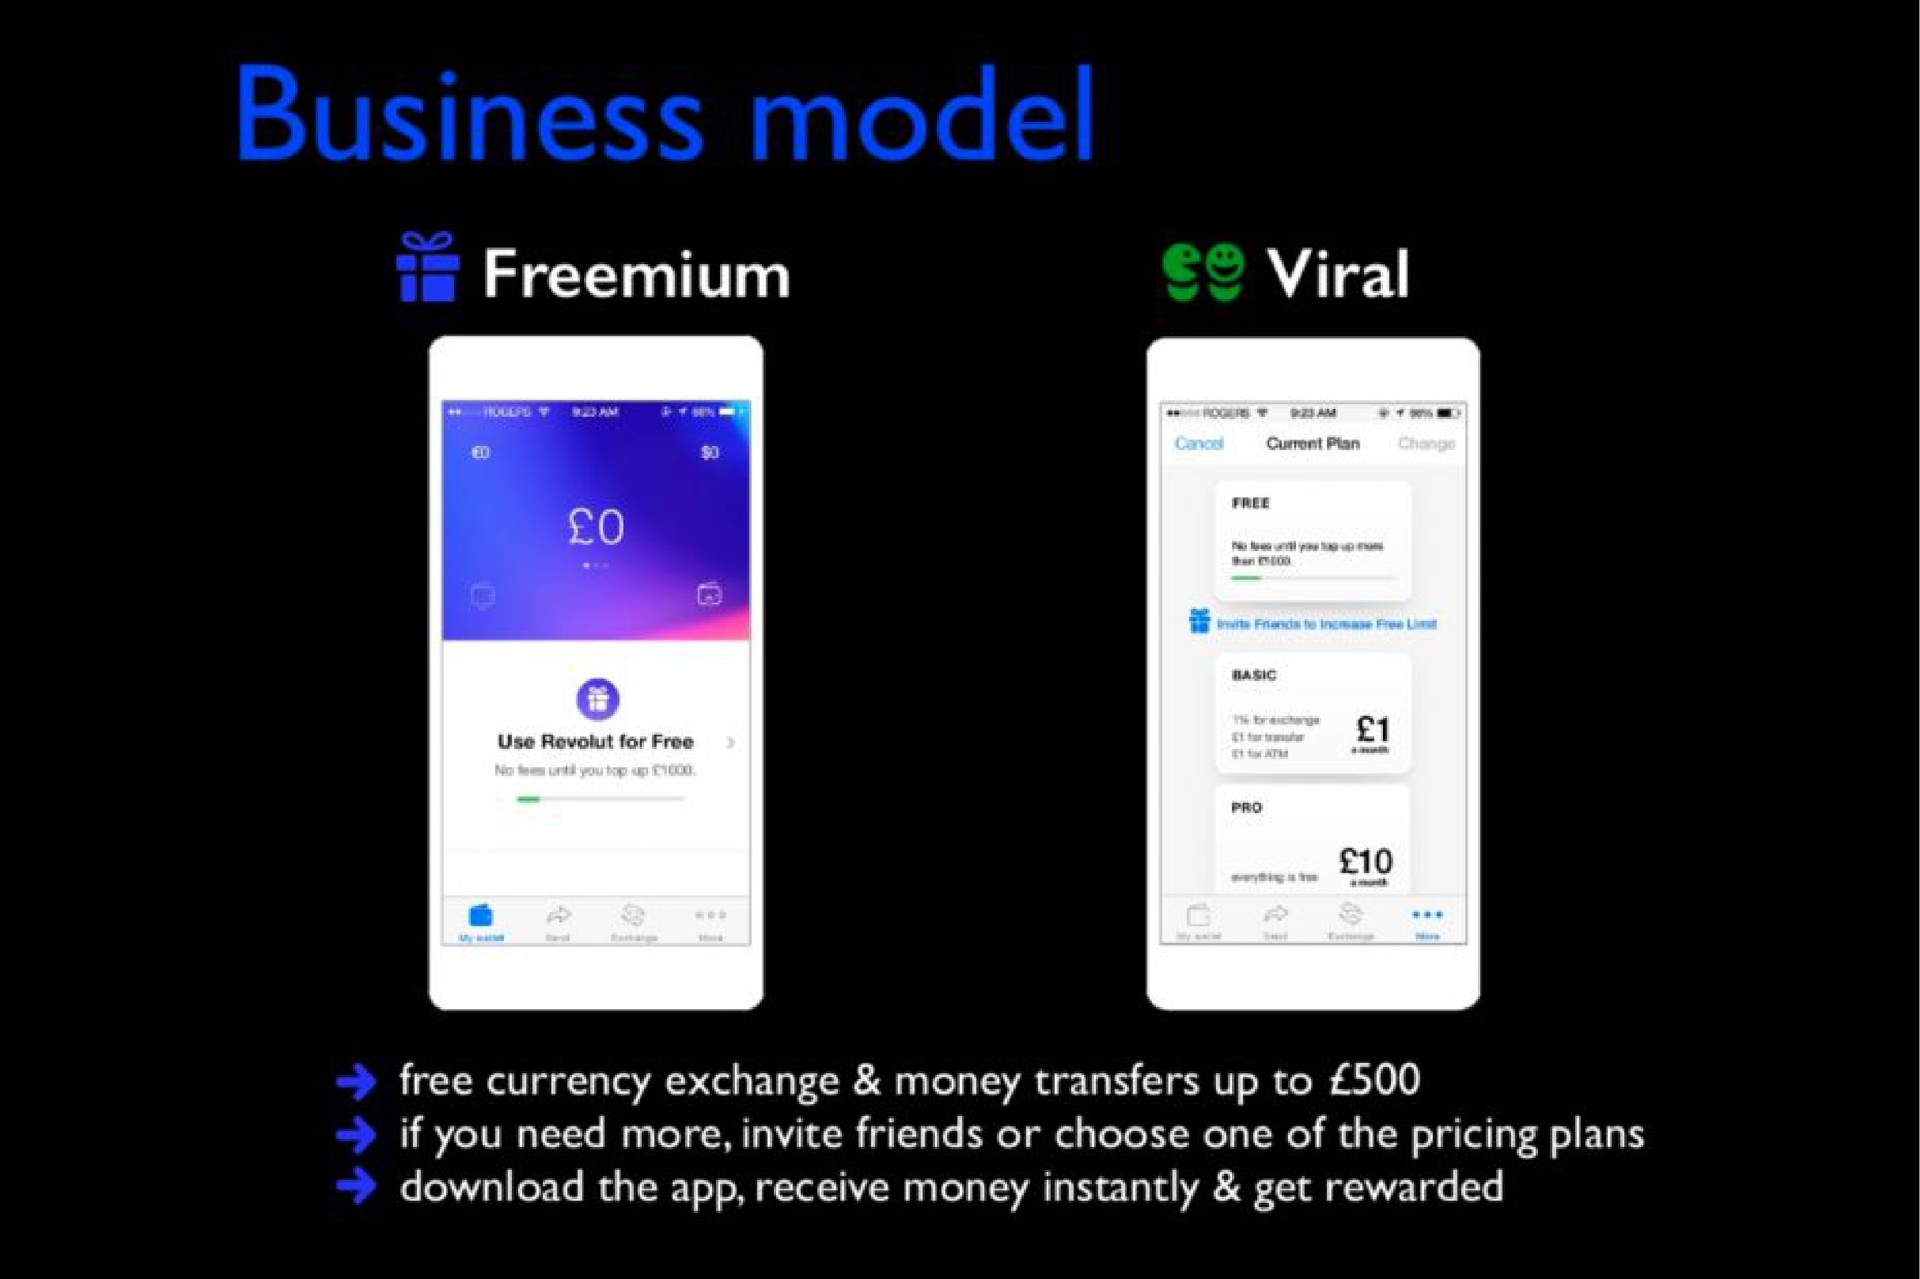 free currency exchange money transfers up to if you need more invite friends or choose one of the pricing plans the receive money instantly get rewarded | Revolut